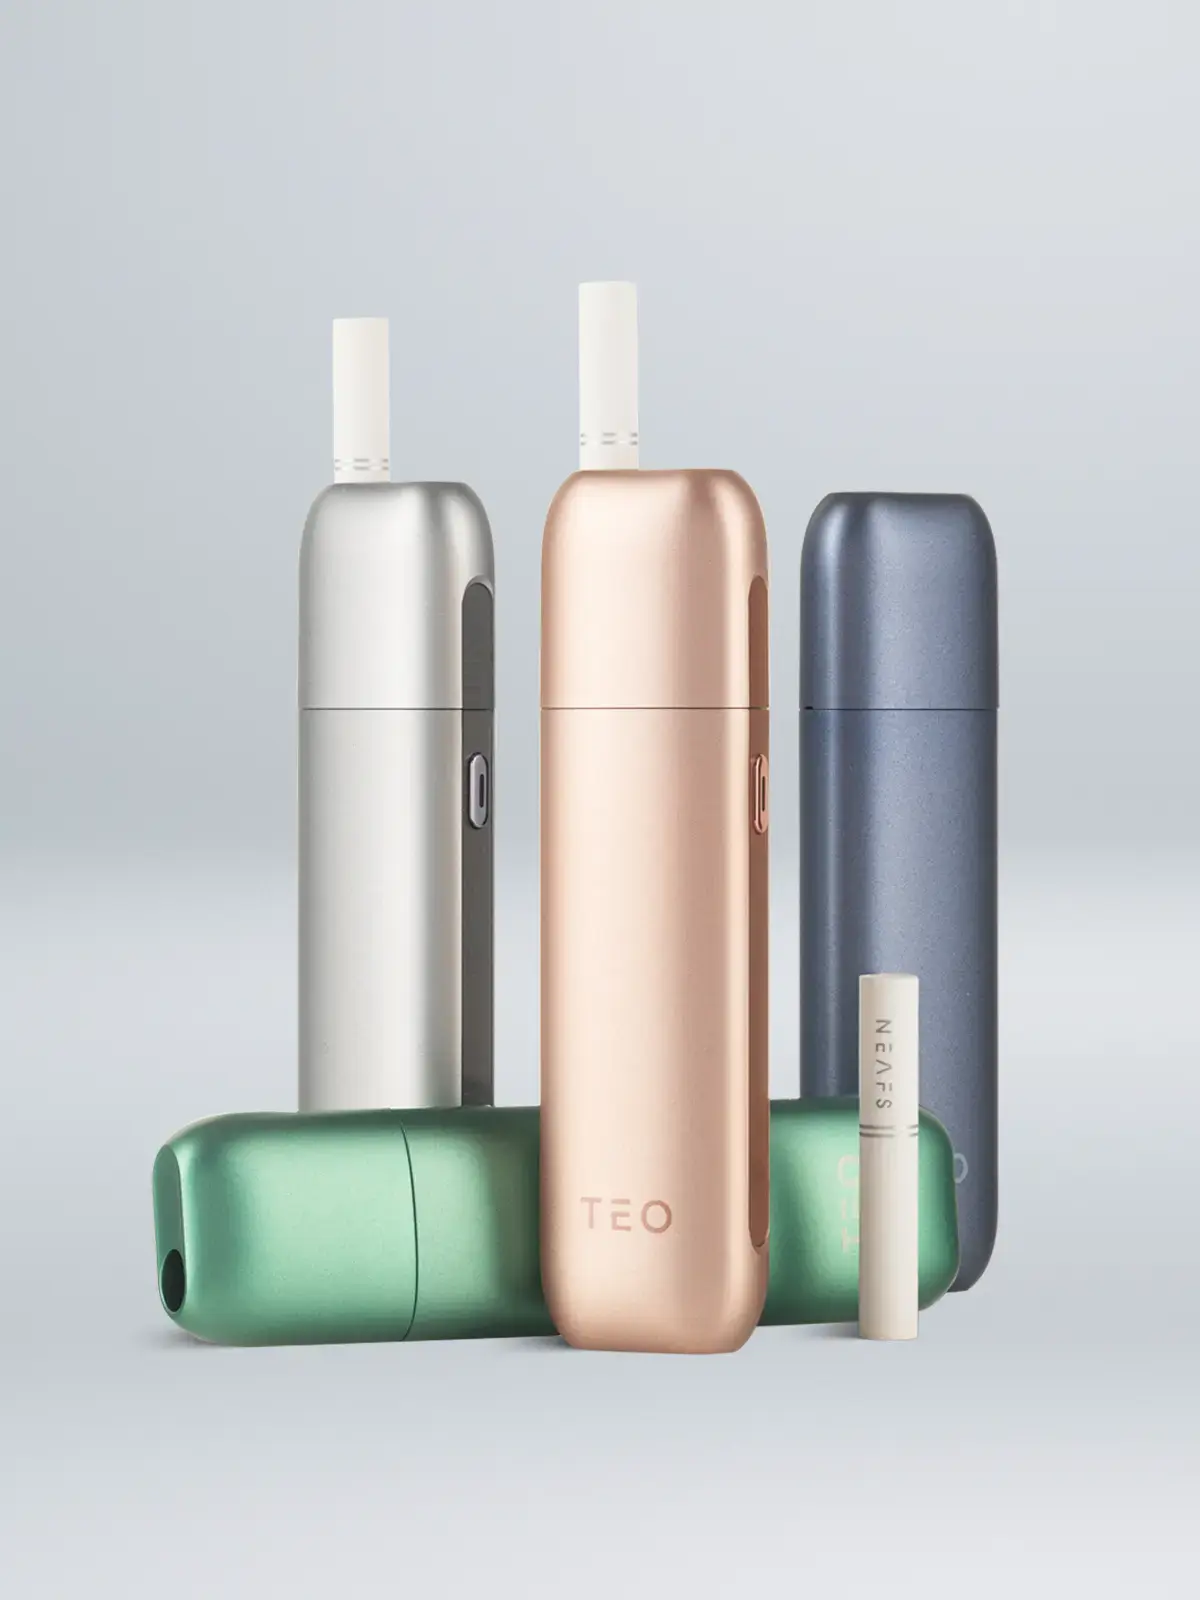 Four NEAFS Teo devices in Titanium Grey, Blue, Green and Rose Gold along with a single NEAFS stick, standing in front of a light background